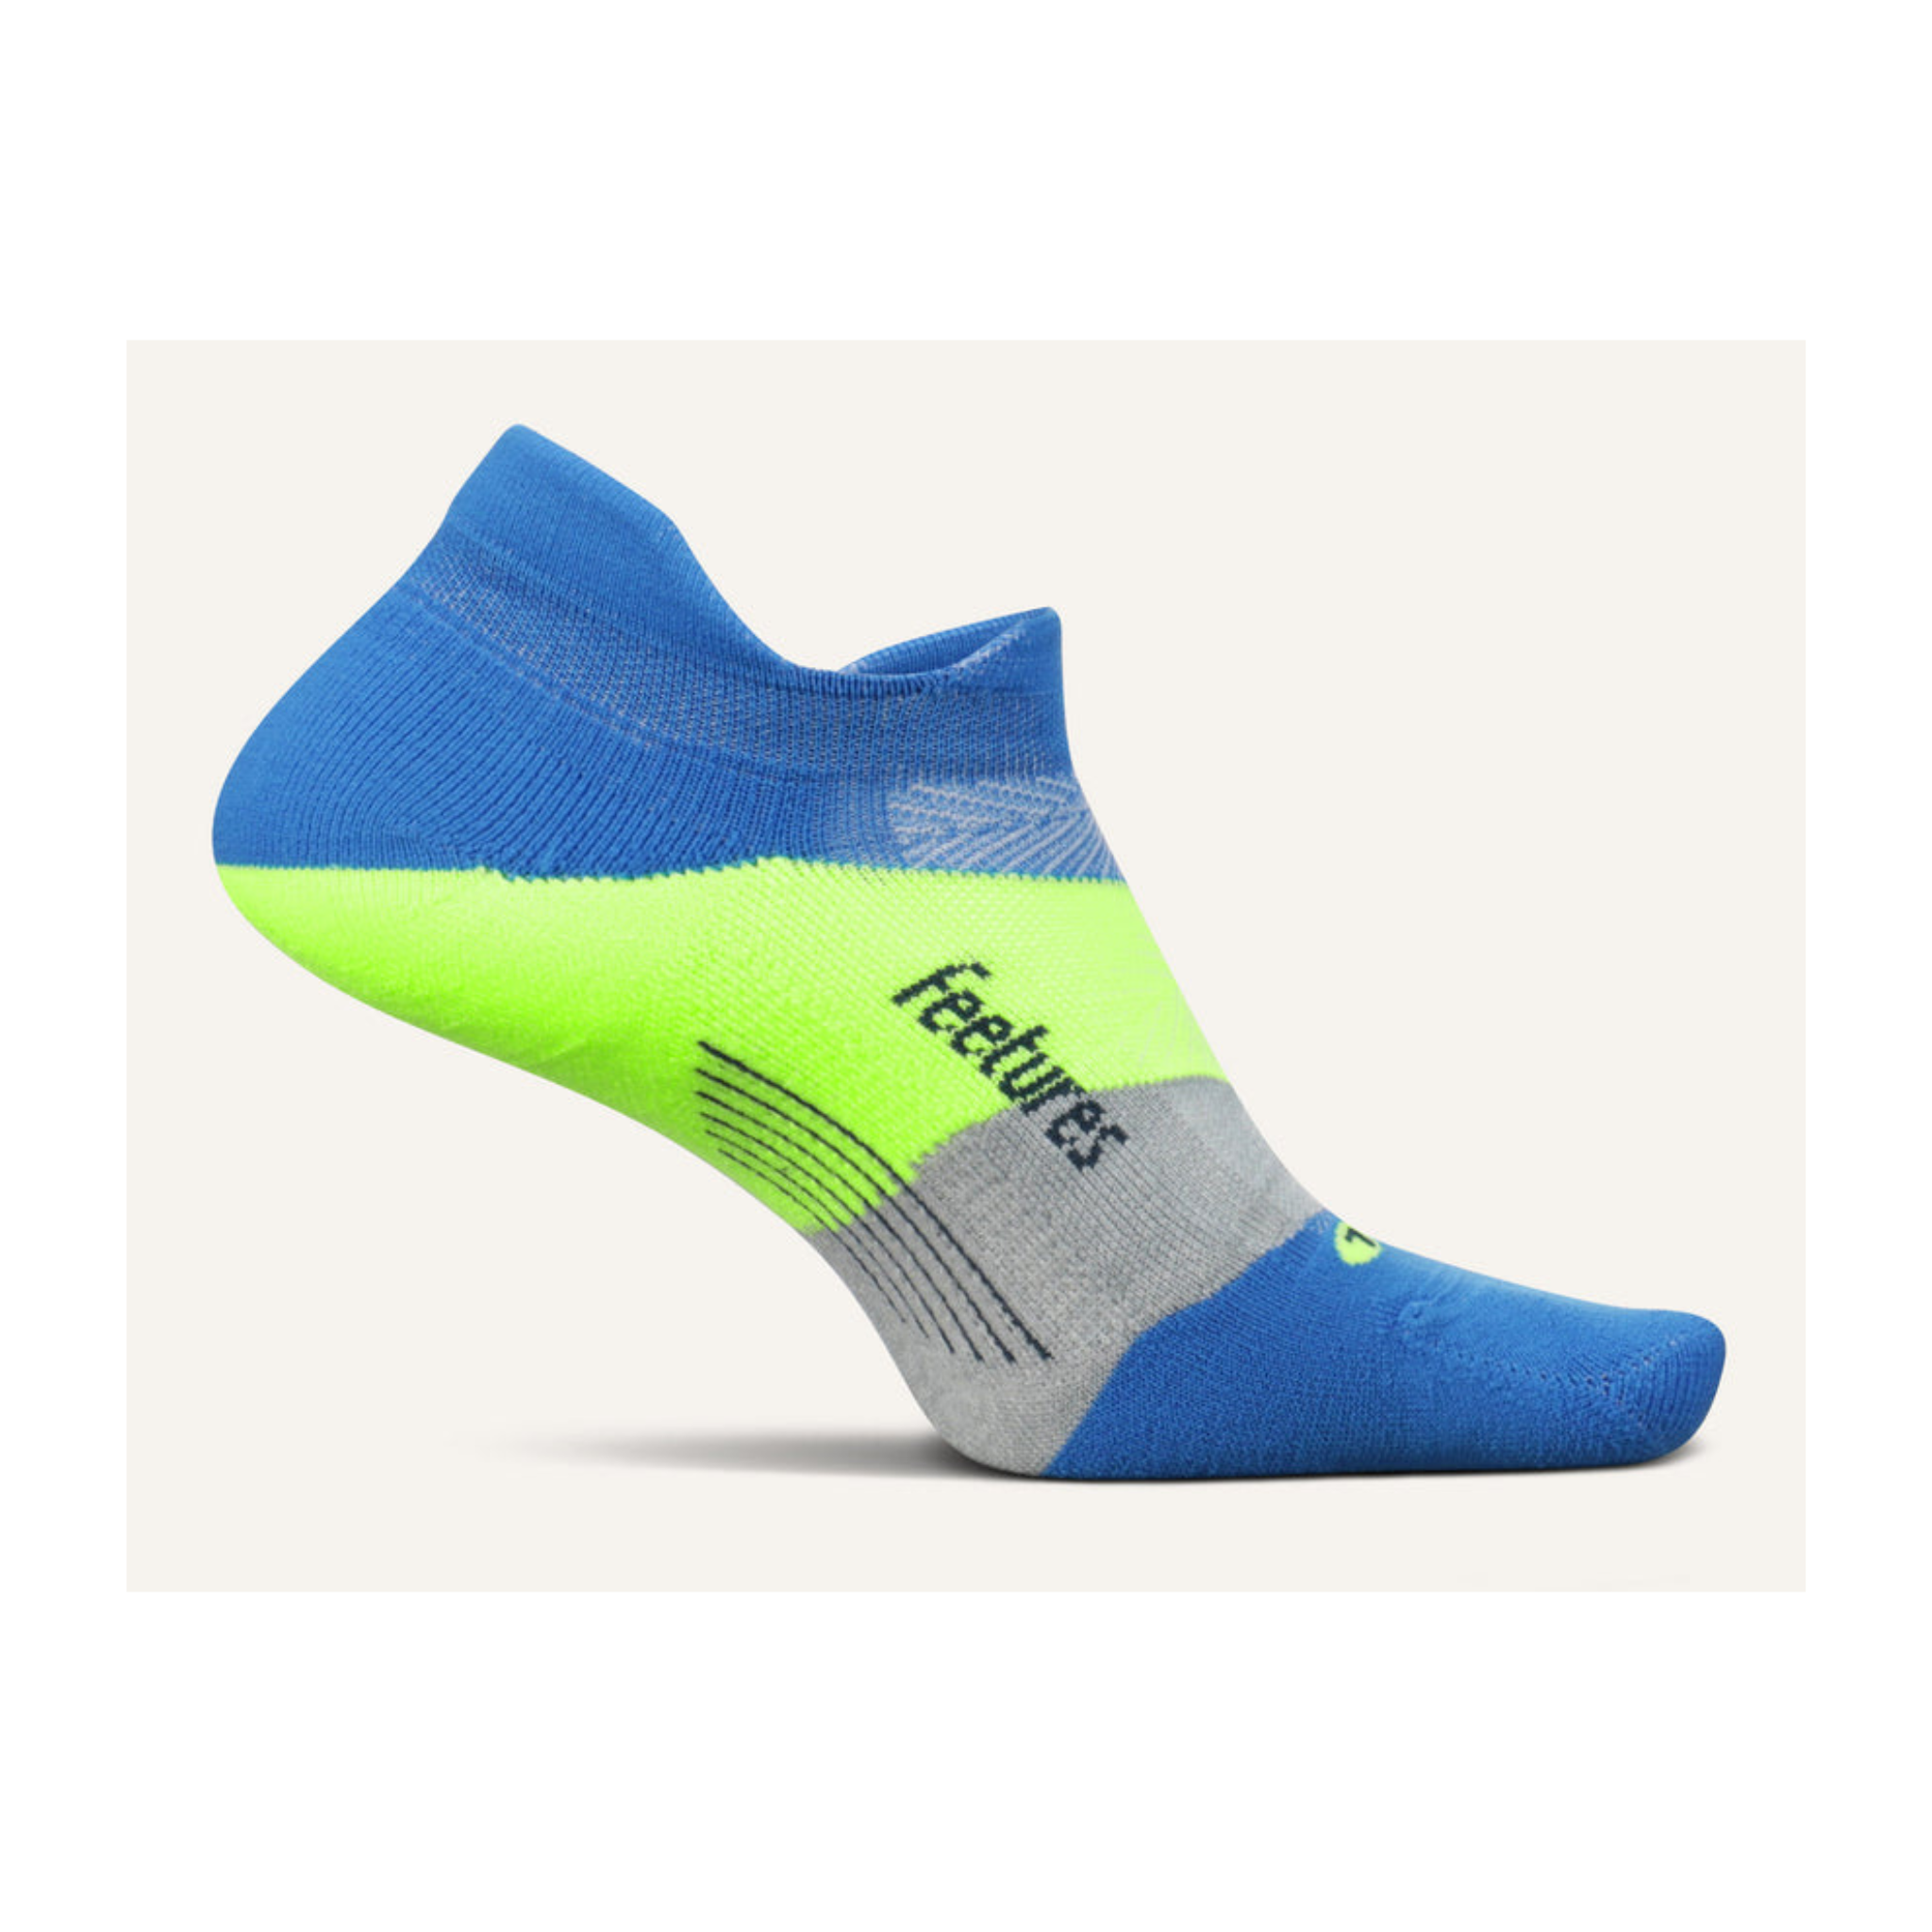 FEETURES ELITE ULTRA LIGHT NO SHOW TAB CLEARANCE 636 BOULDER BLUE